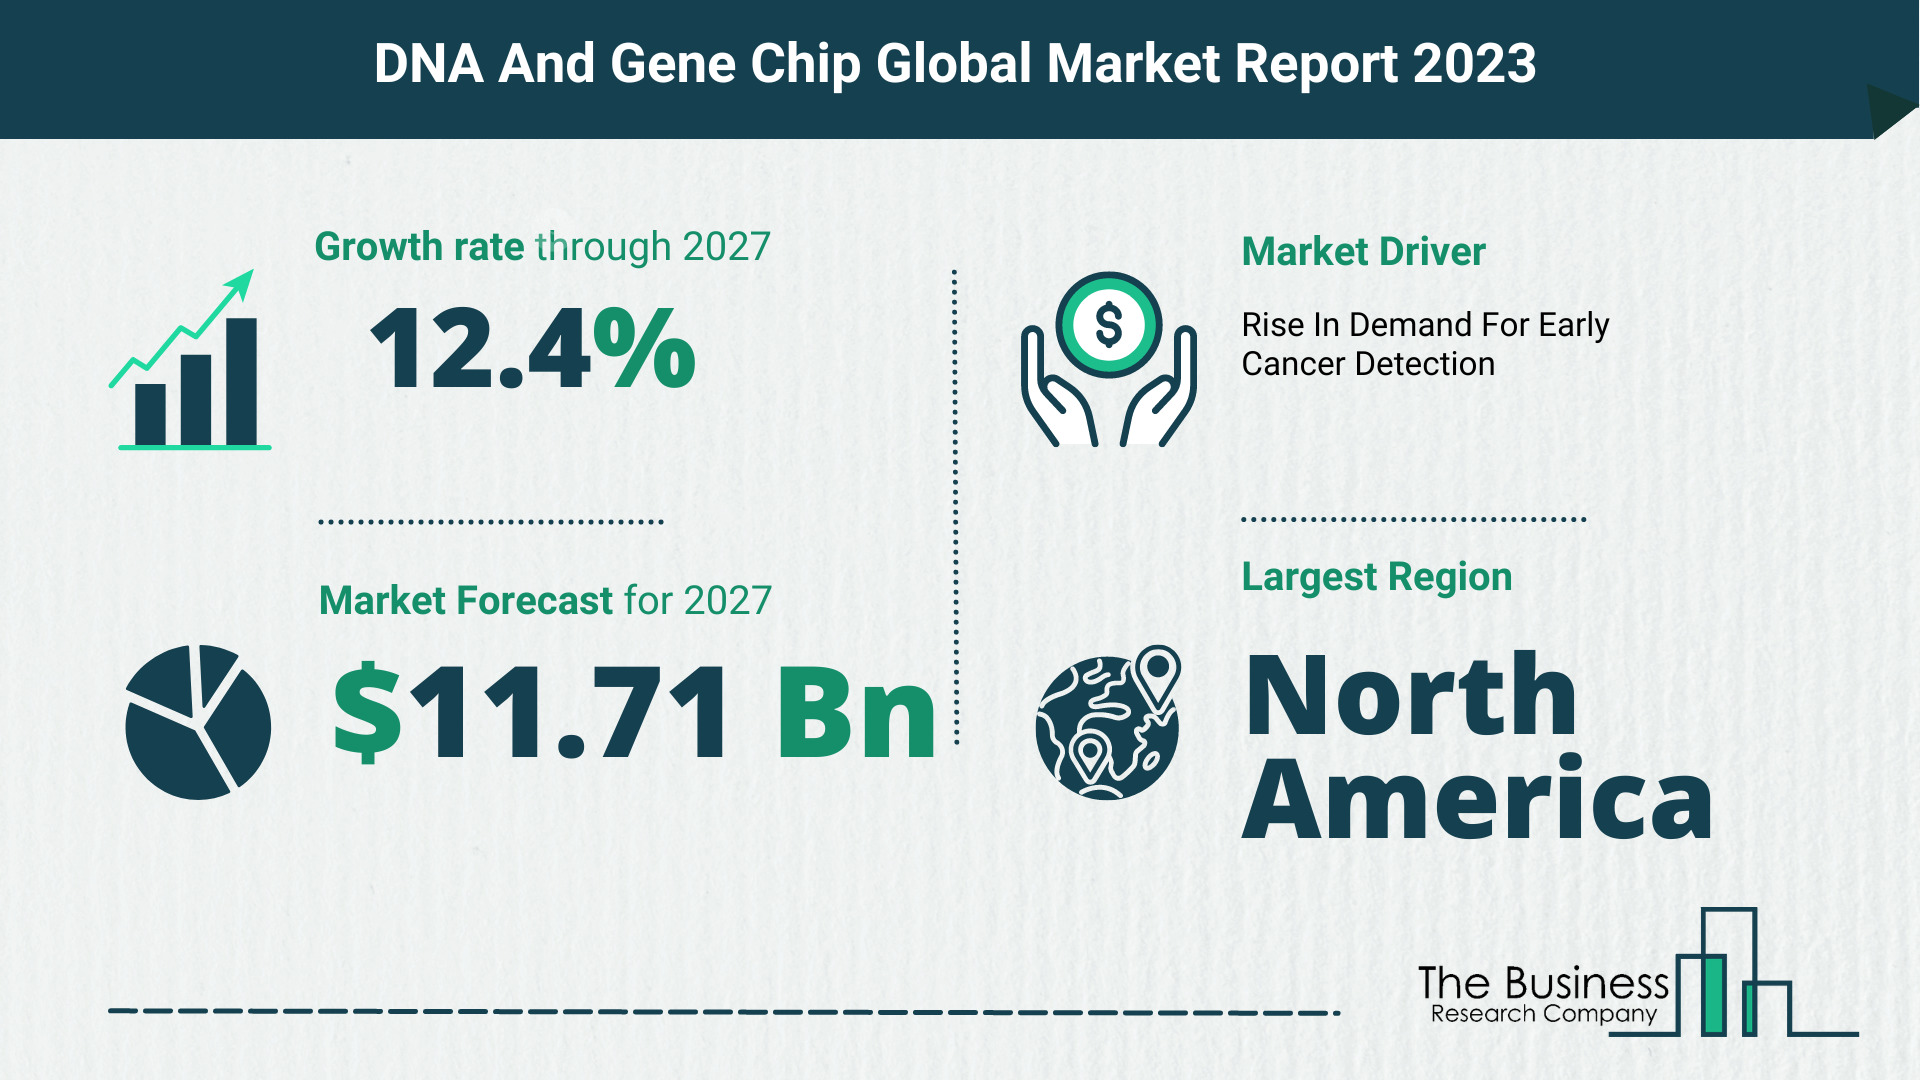 What Will The DNA And Gene Chip Market Look Like In 2023?